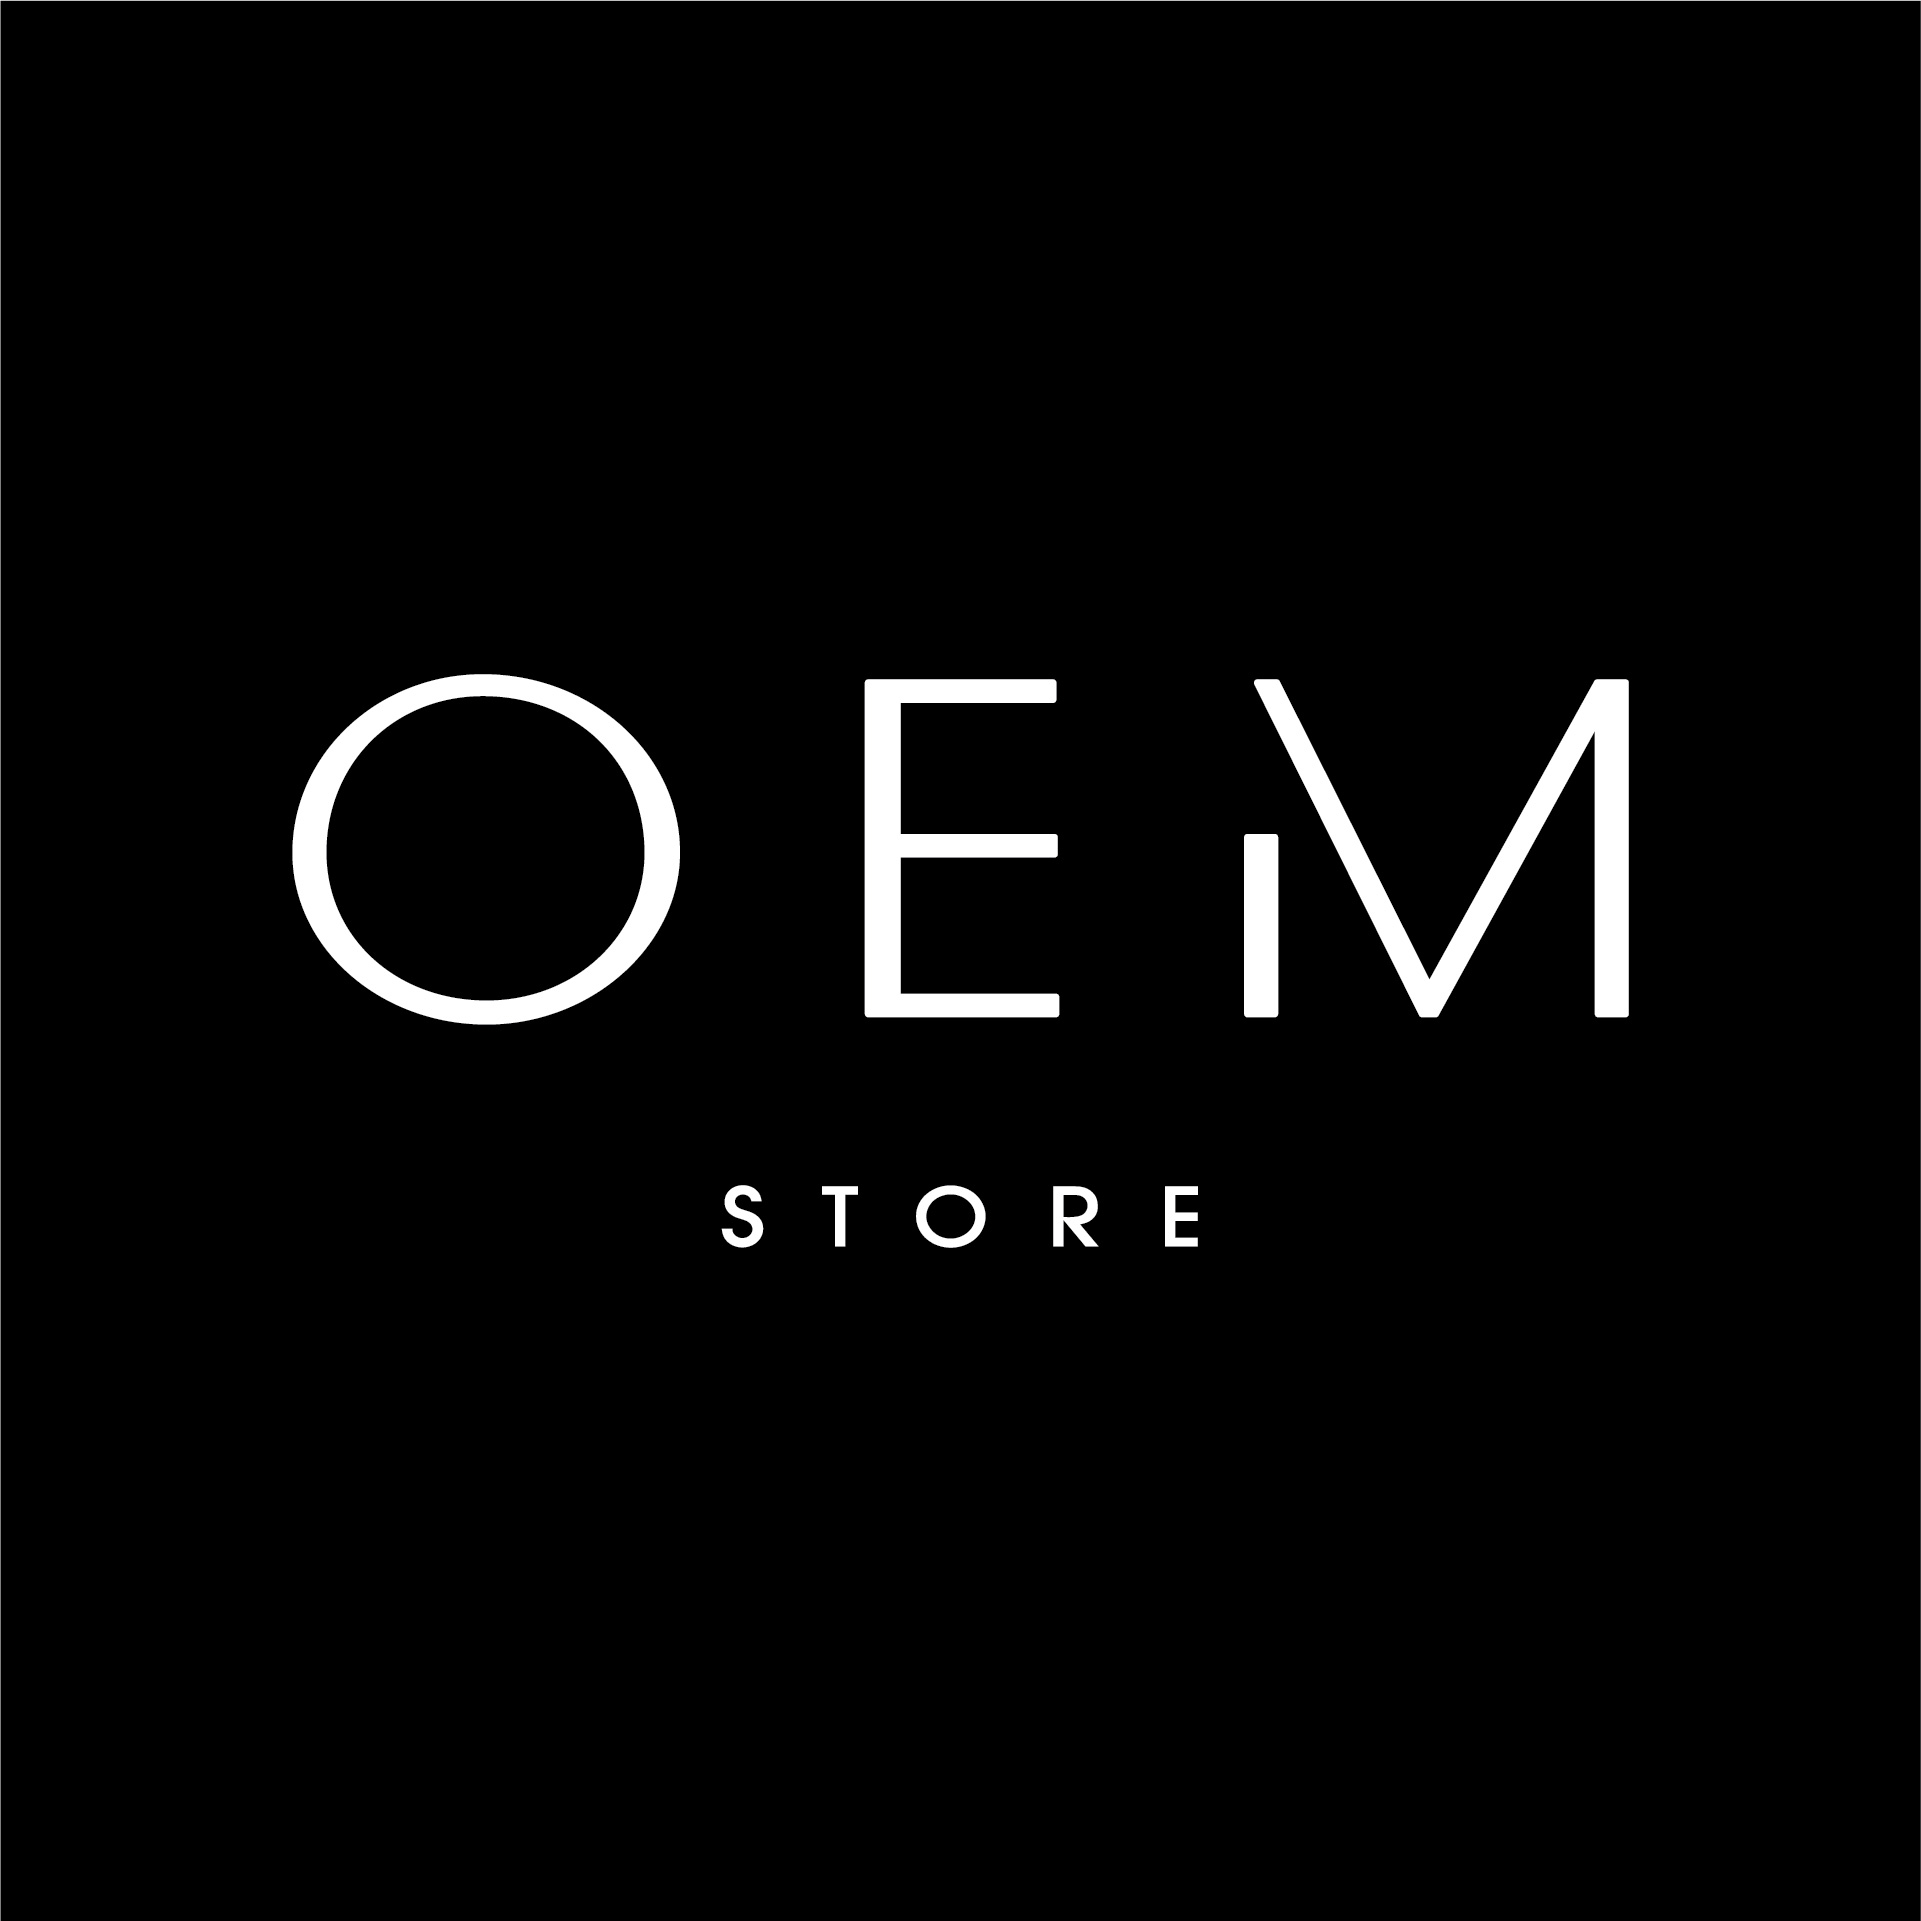 The OEM Store